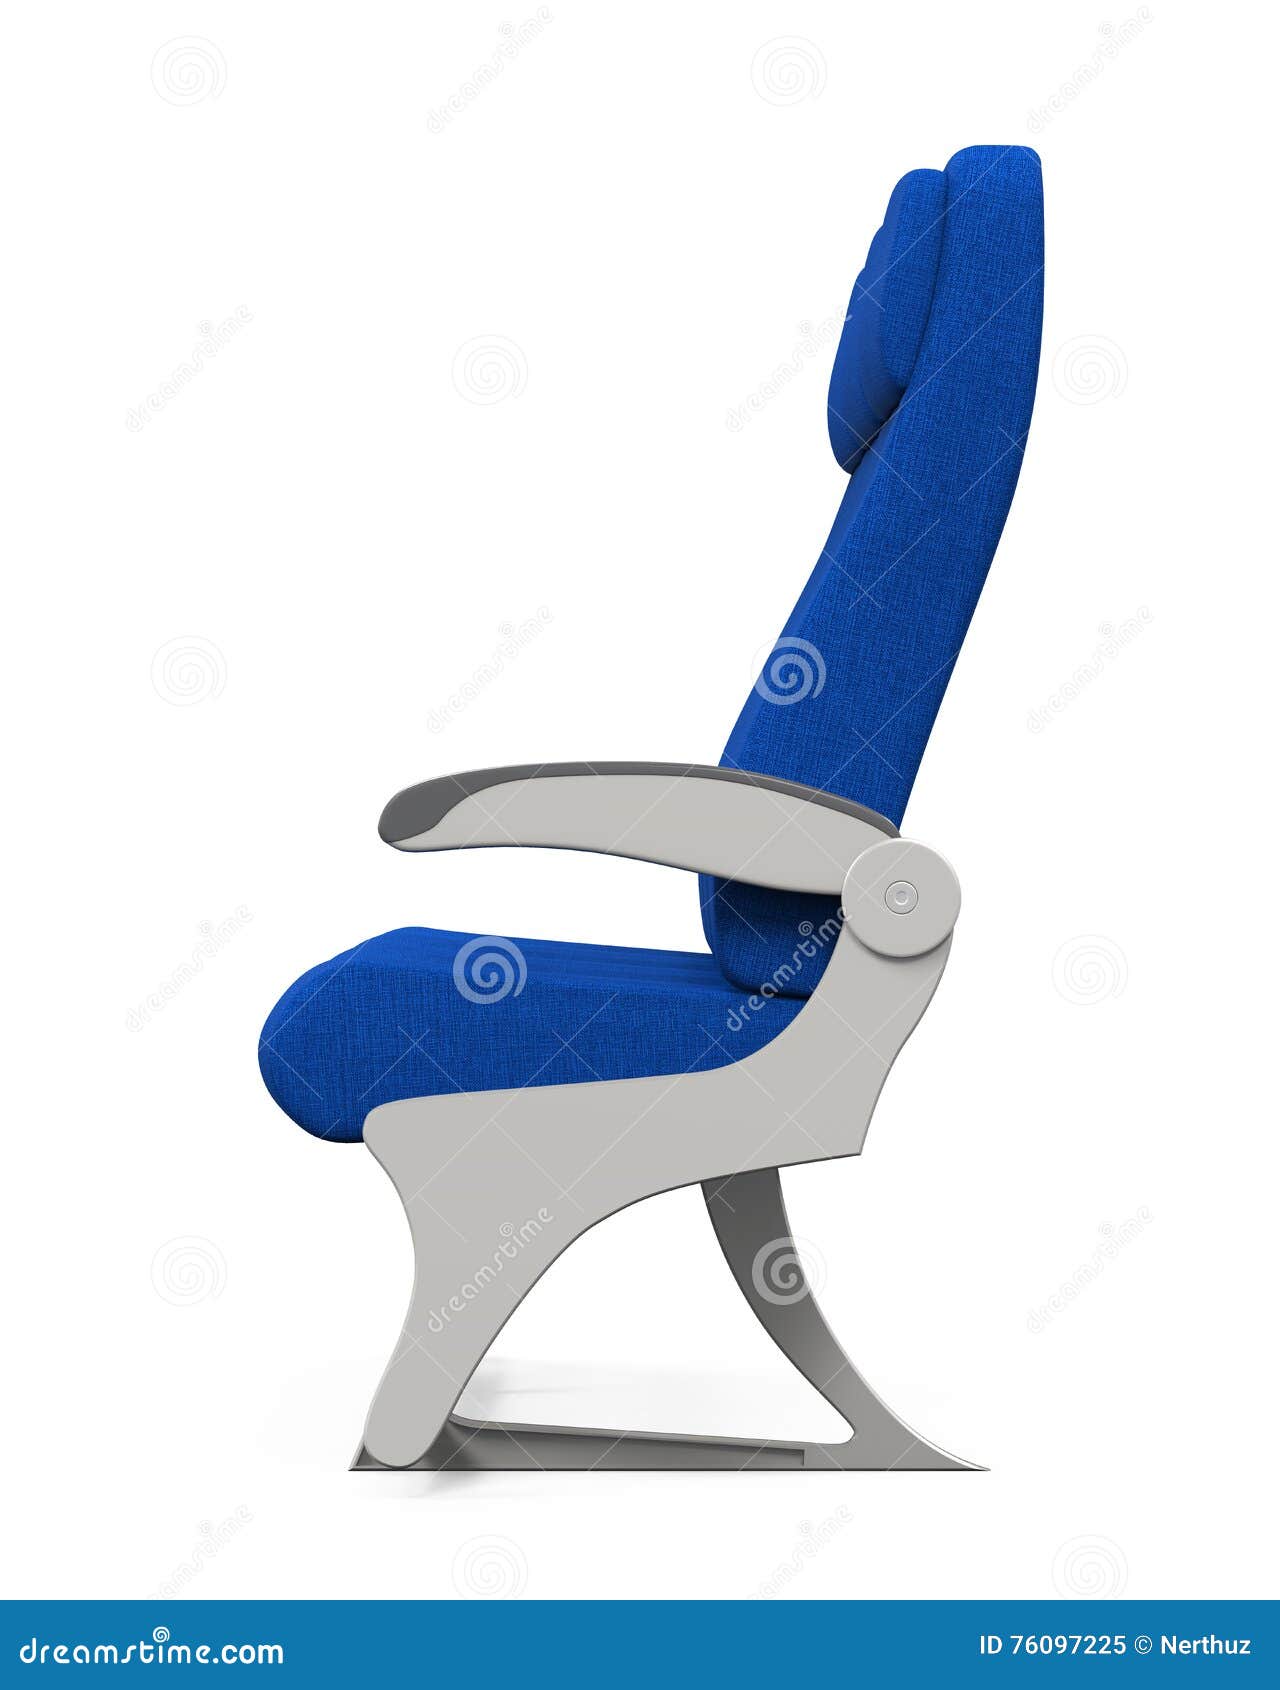 Airplane Seats Isolated stock image. Image of interior - 76097225